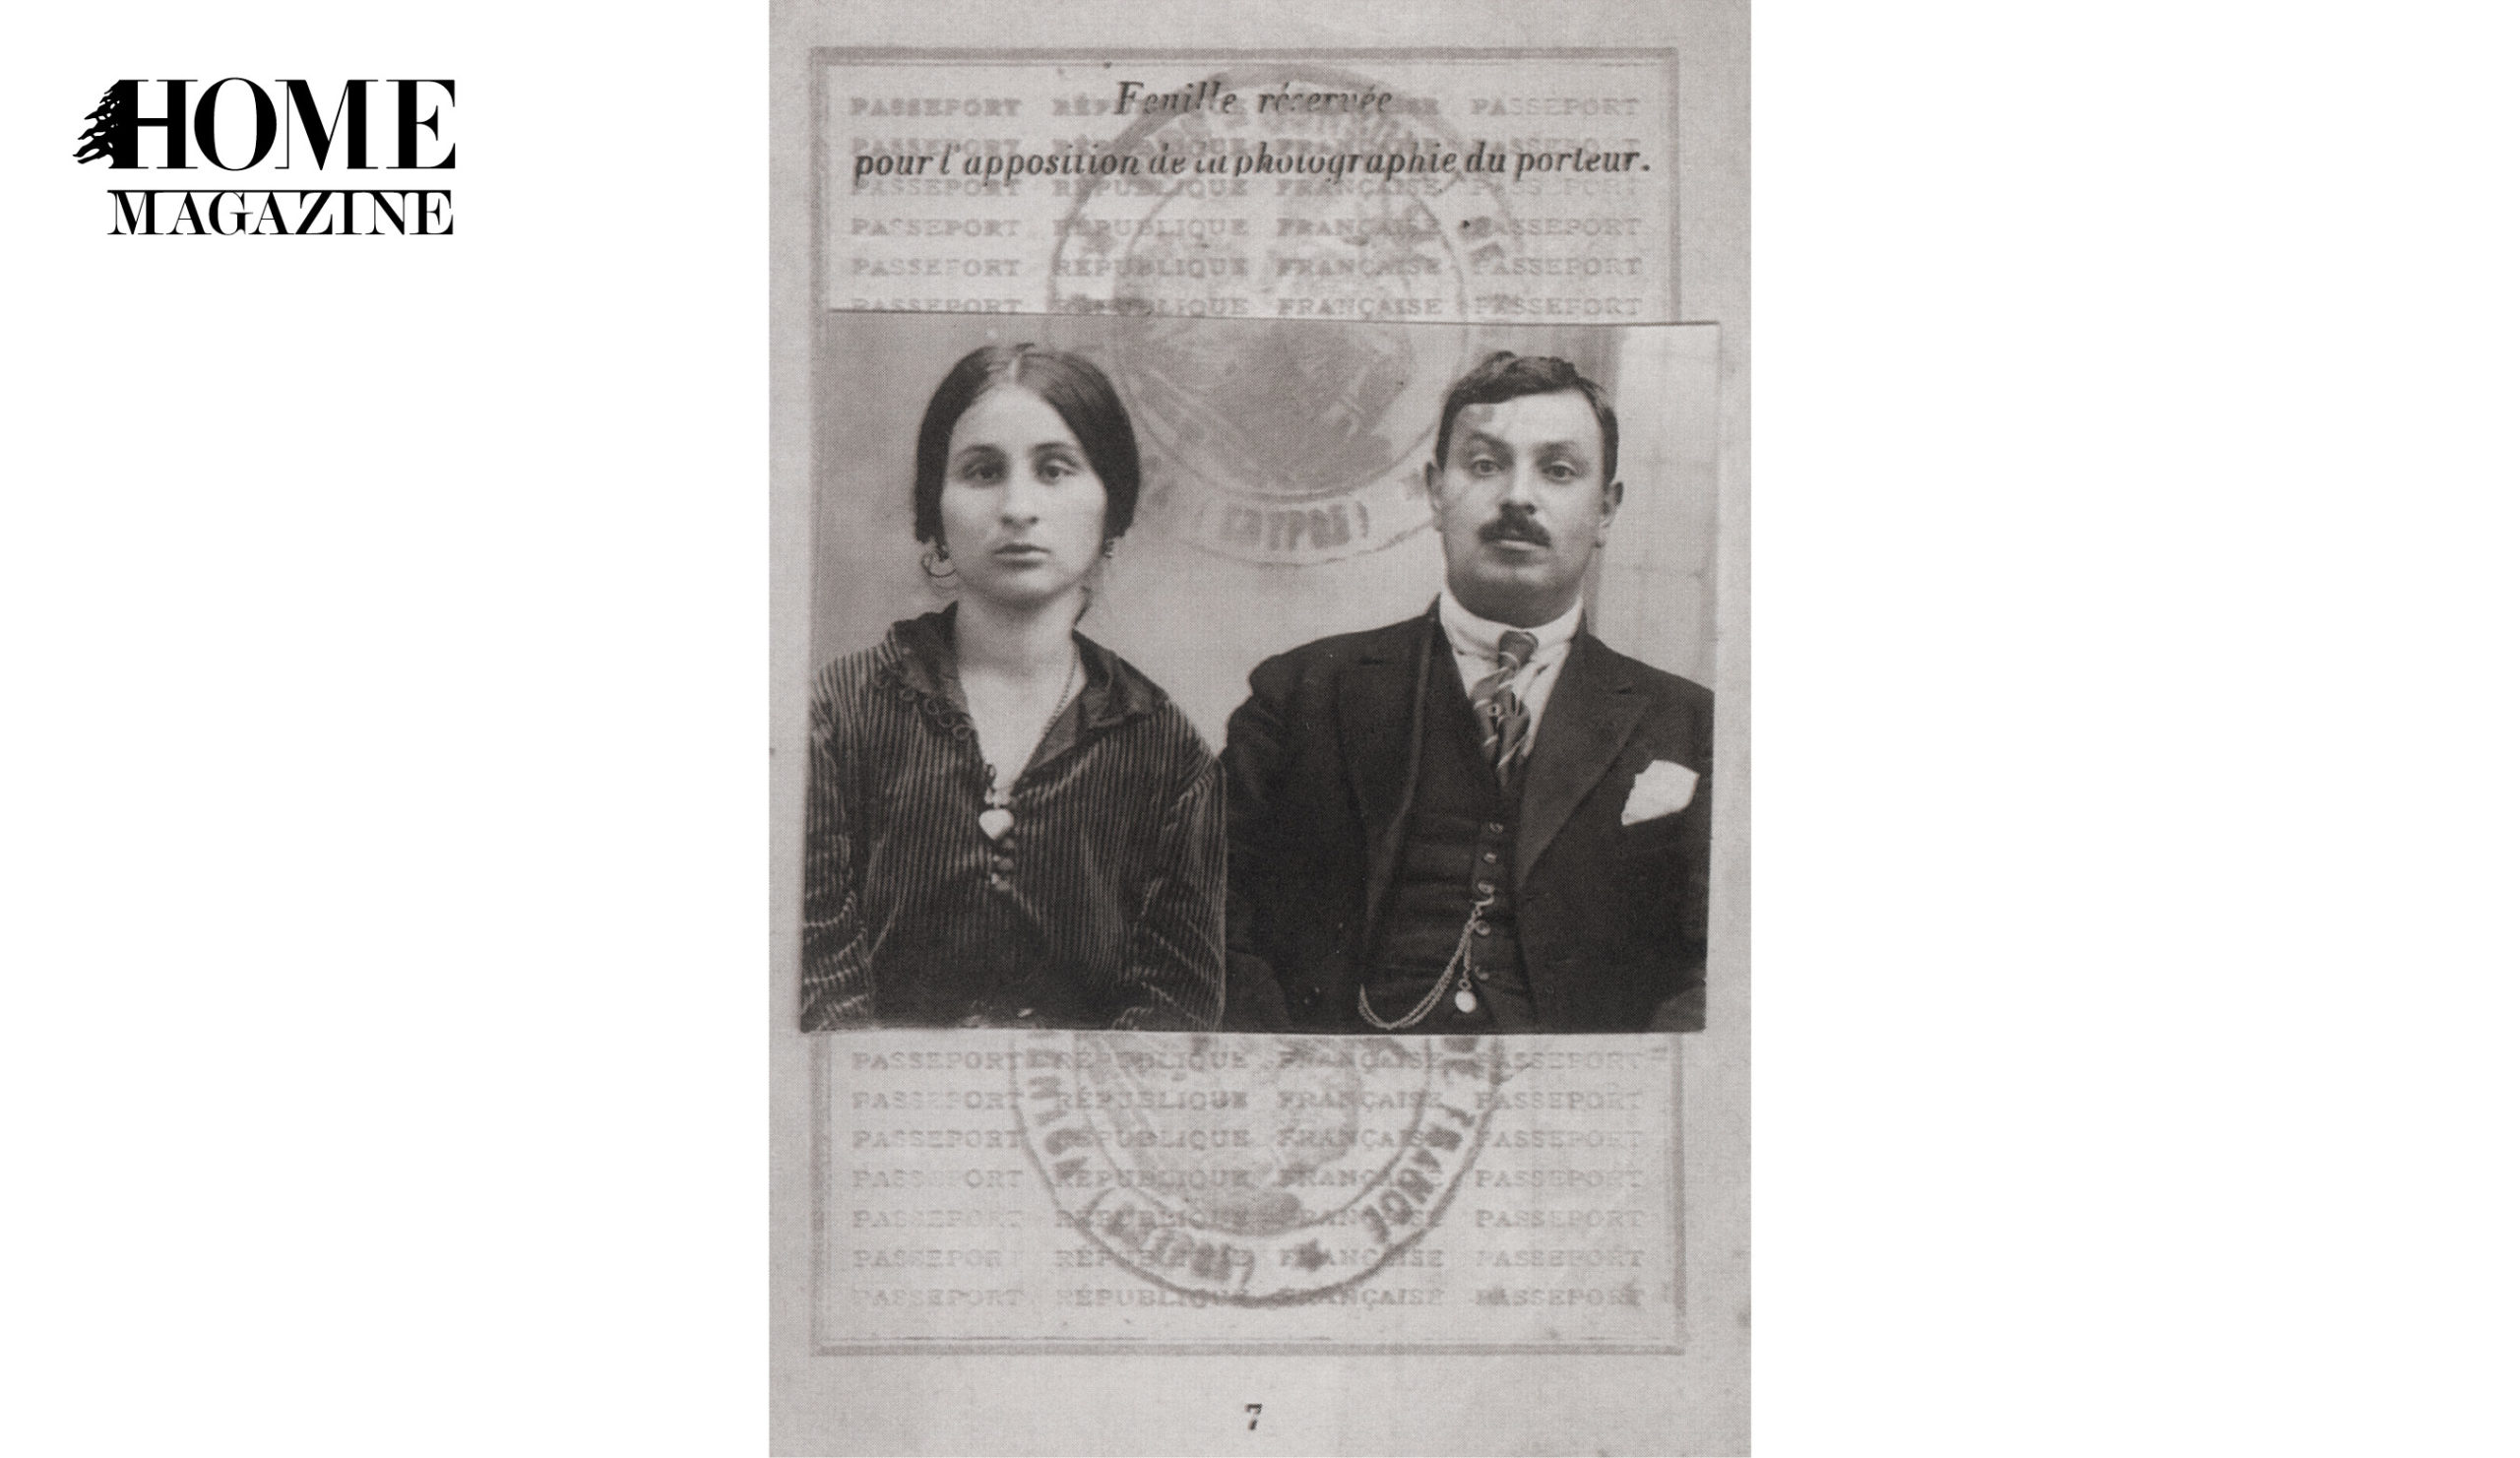 Picture of a man and woman in black and white